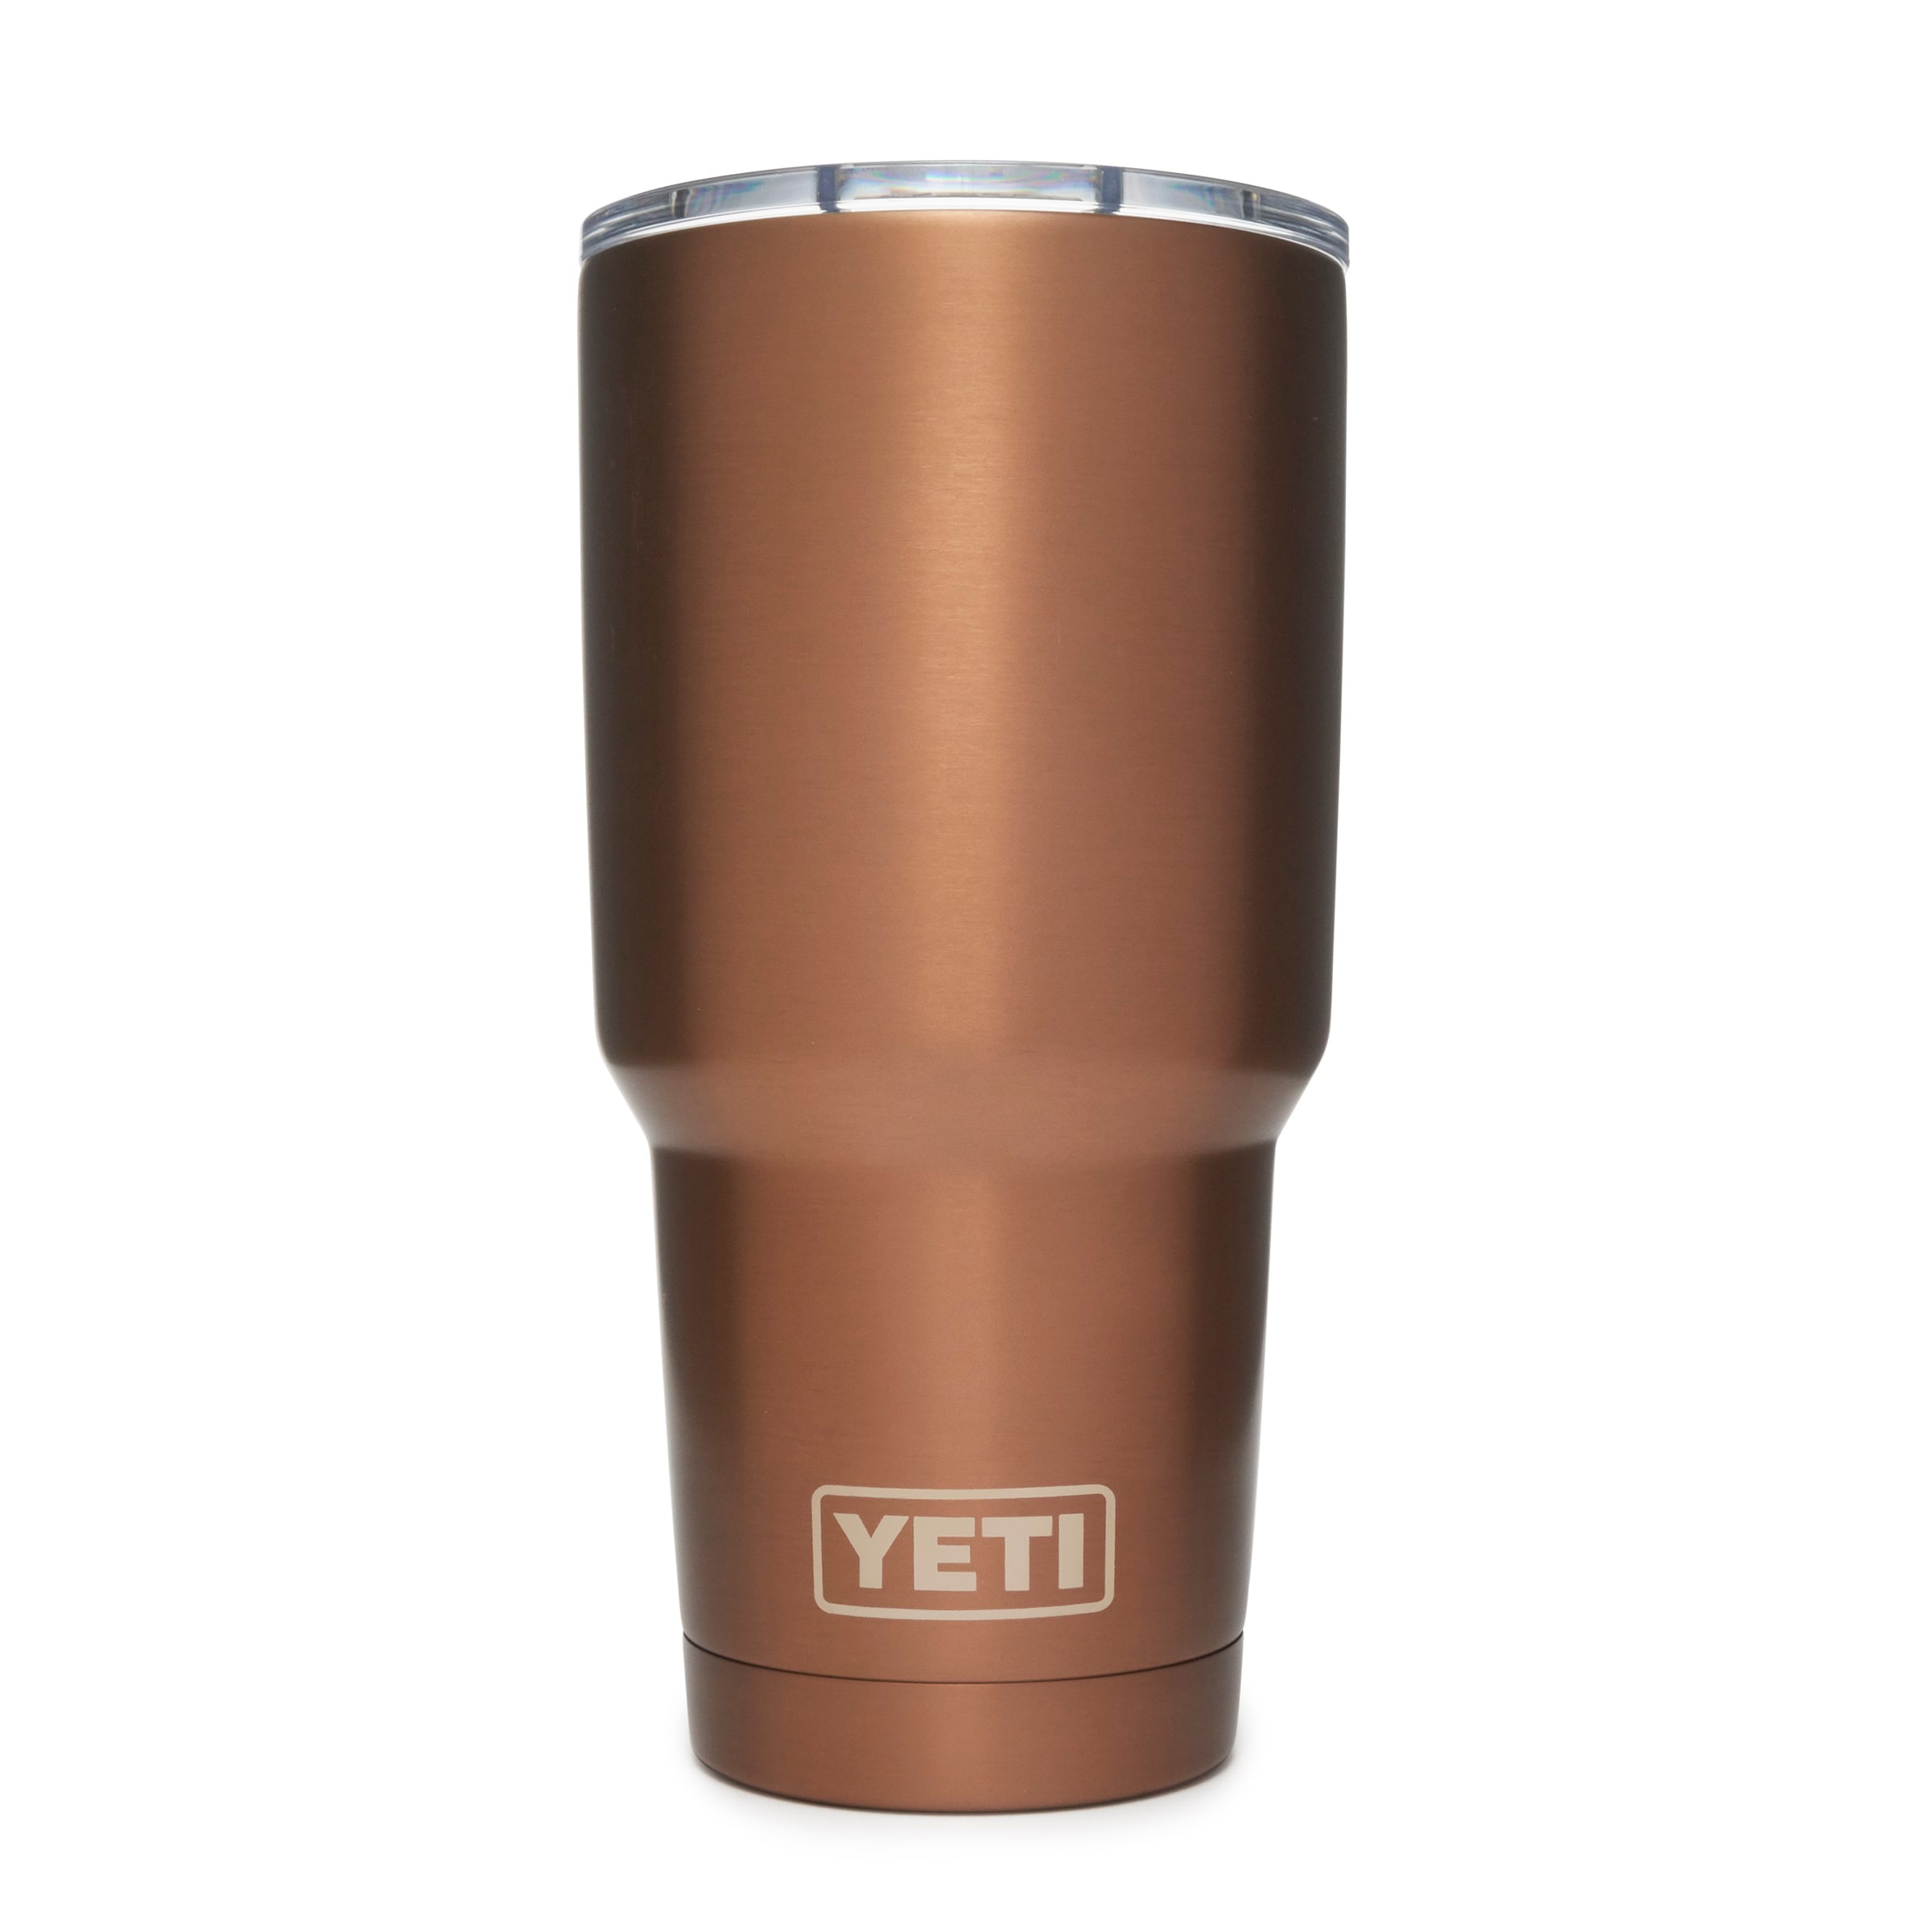 Help with Yeti cup. Is this rust or a stains from black tea? I've